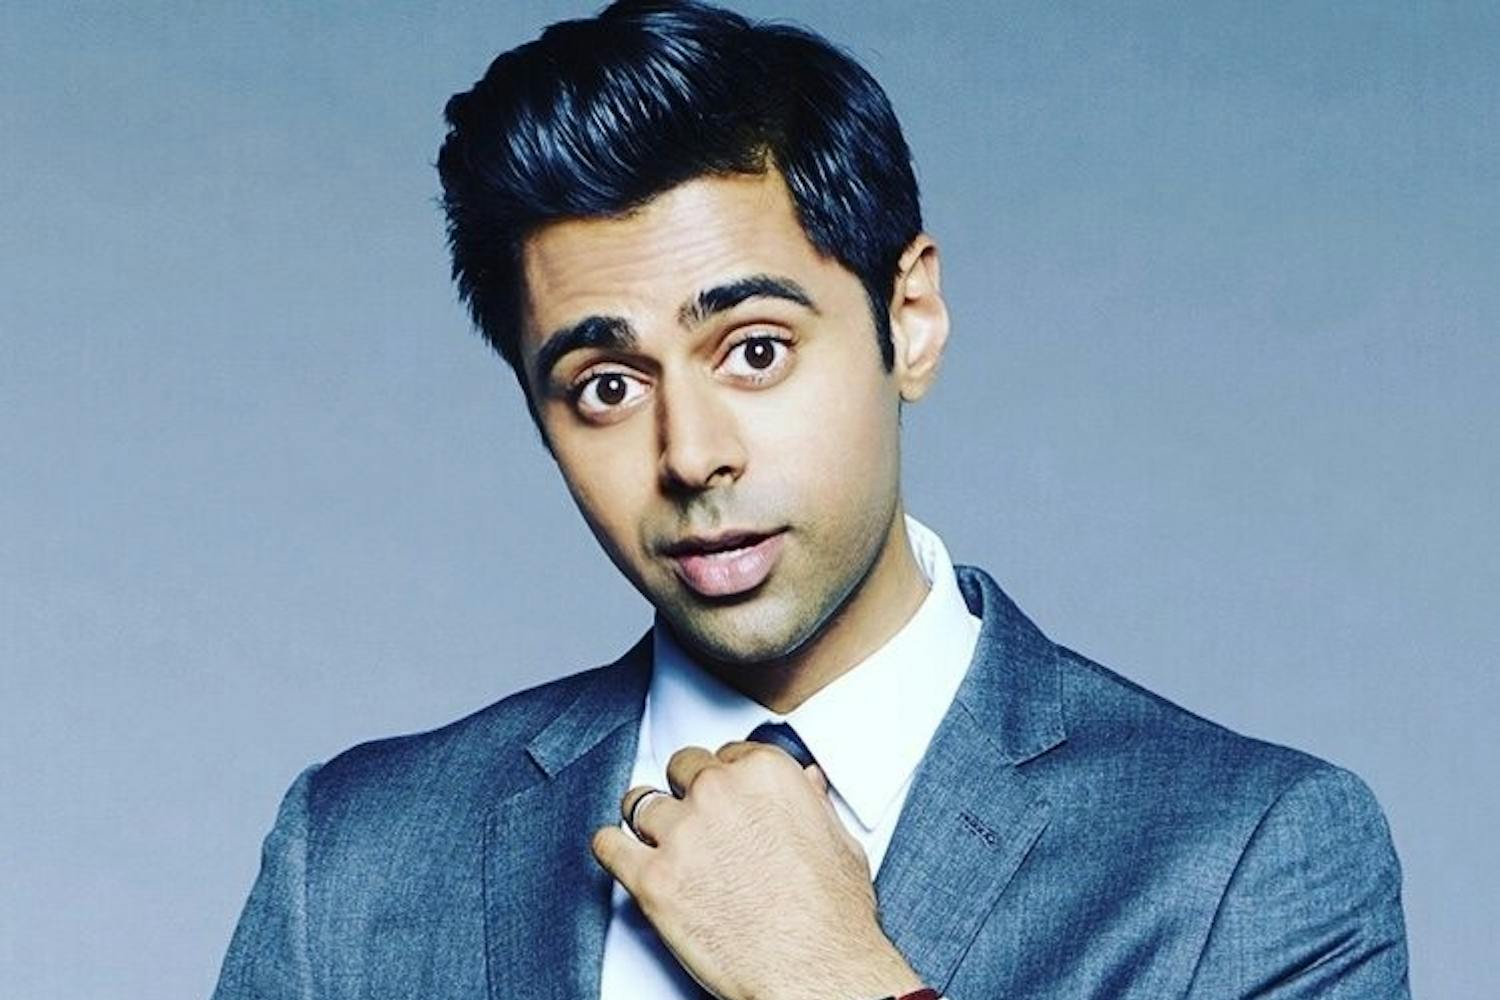 The Daily Show correspondent Hasan Minhaj is bringing his stand-up comedy tour to the Mesa Arts Center on Tuesday, August 30.&nbsp;Photo from&nbsp;http://www.hasanminhaj.com/about/